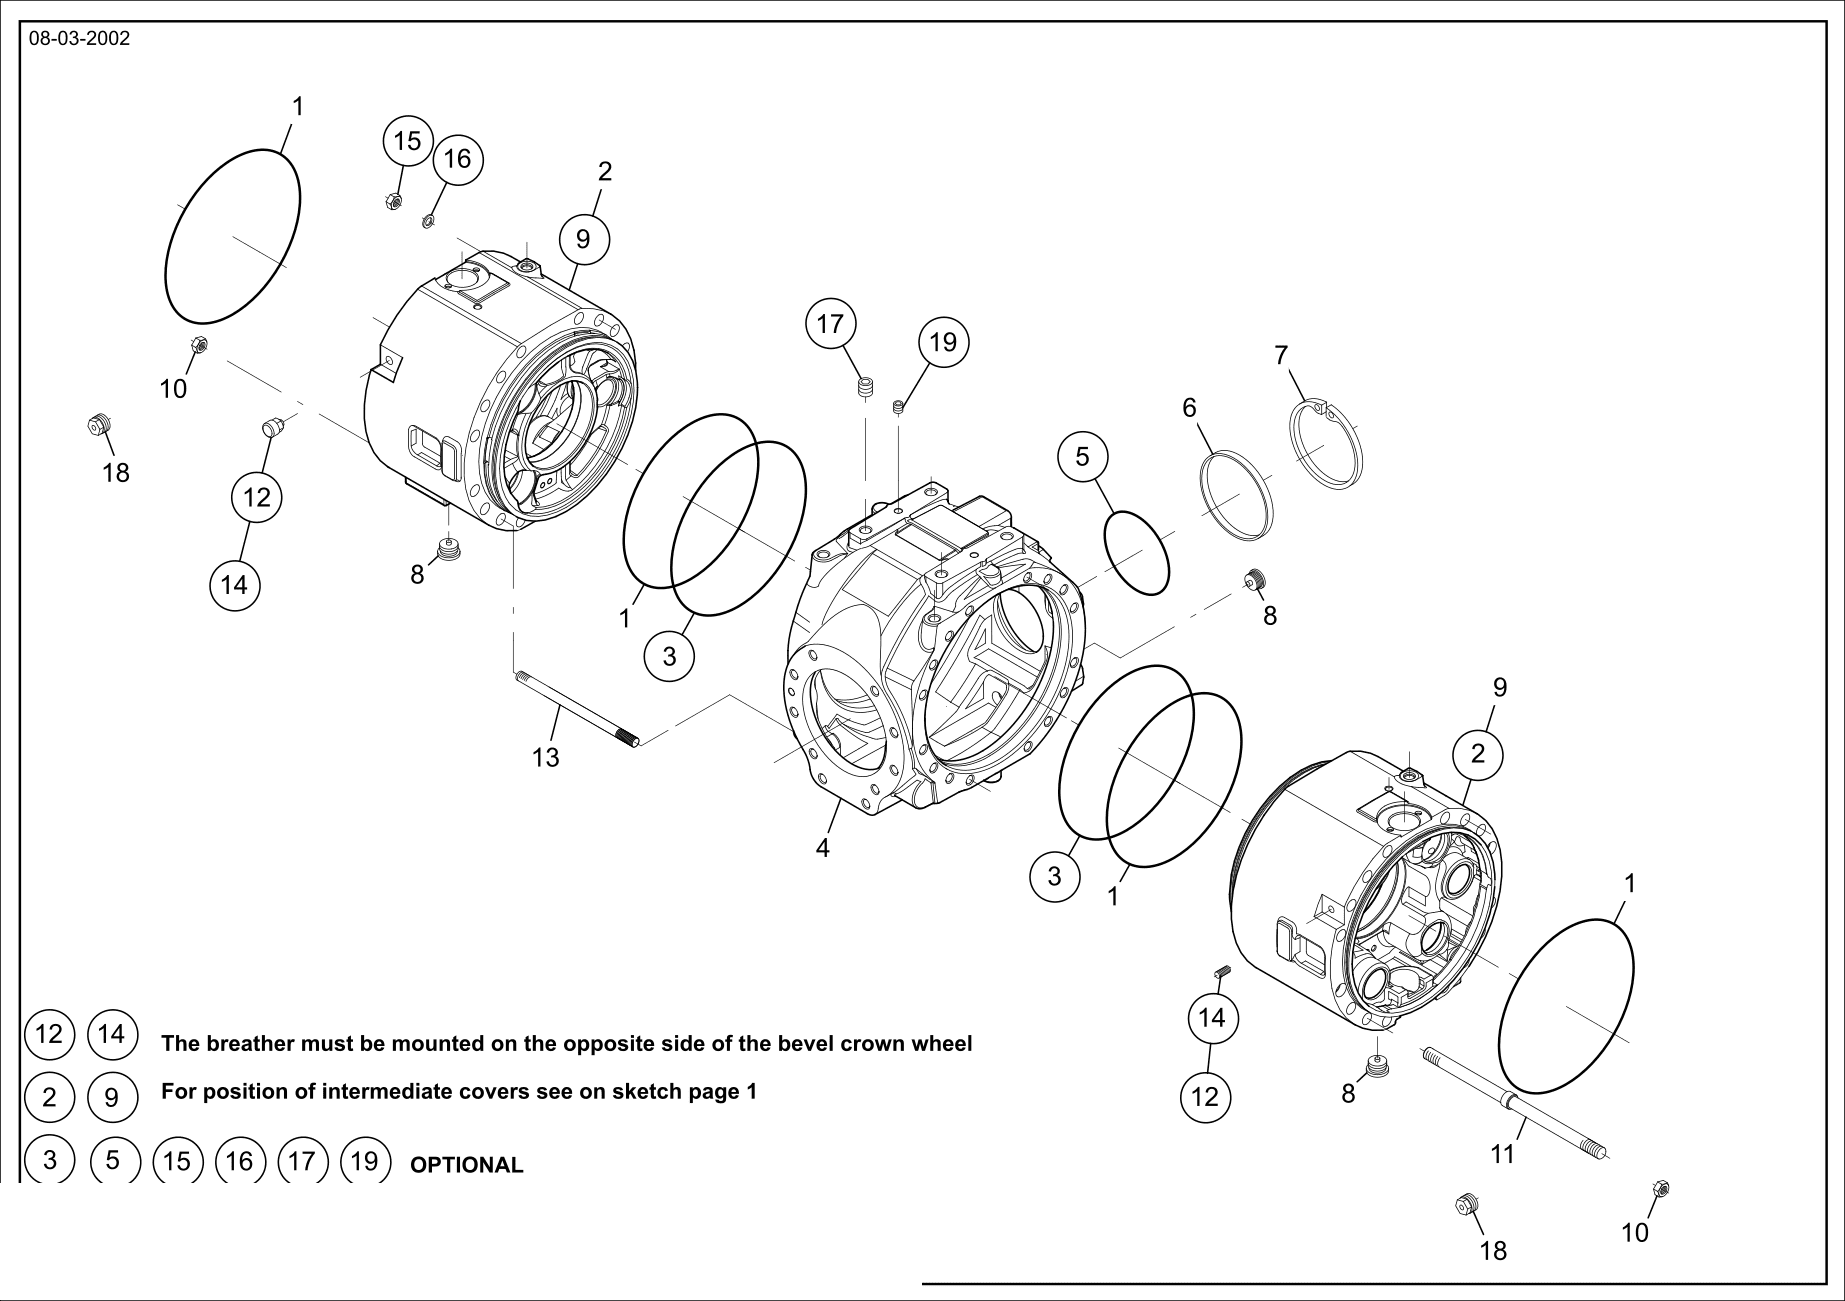 drawing for PAUS 513771 - O - RING (figure 4)